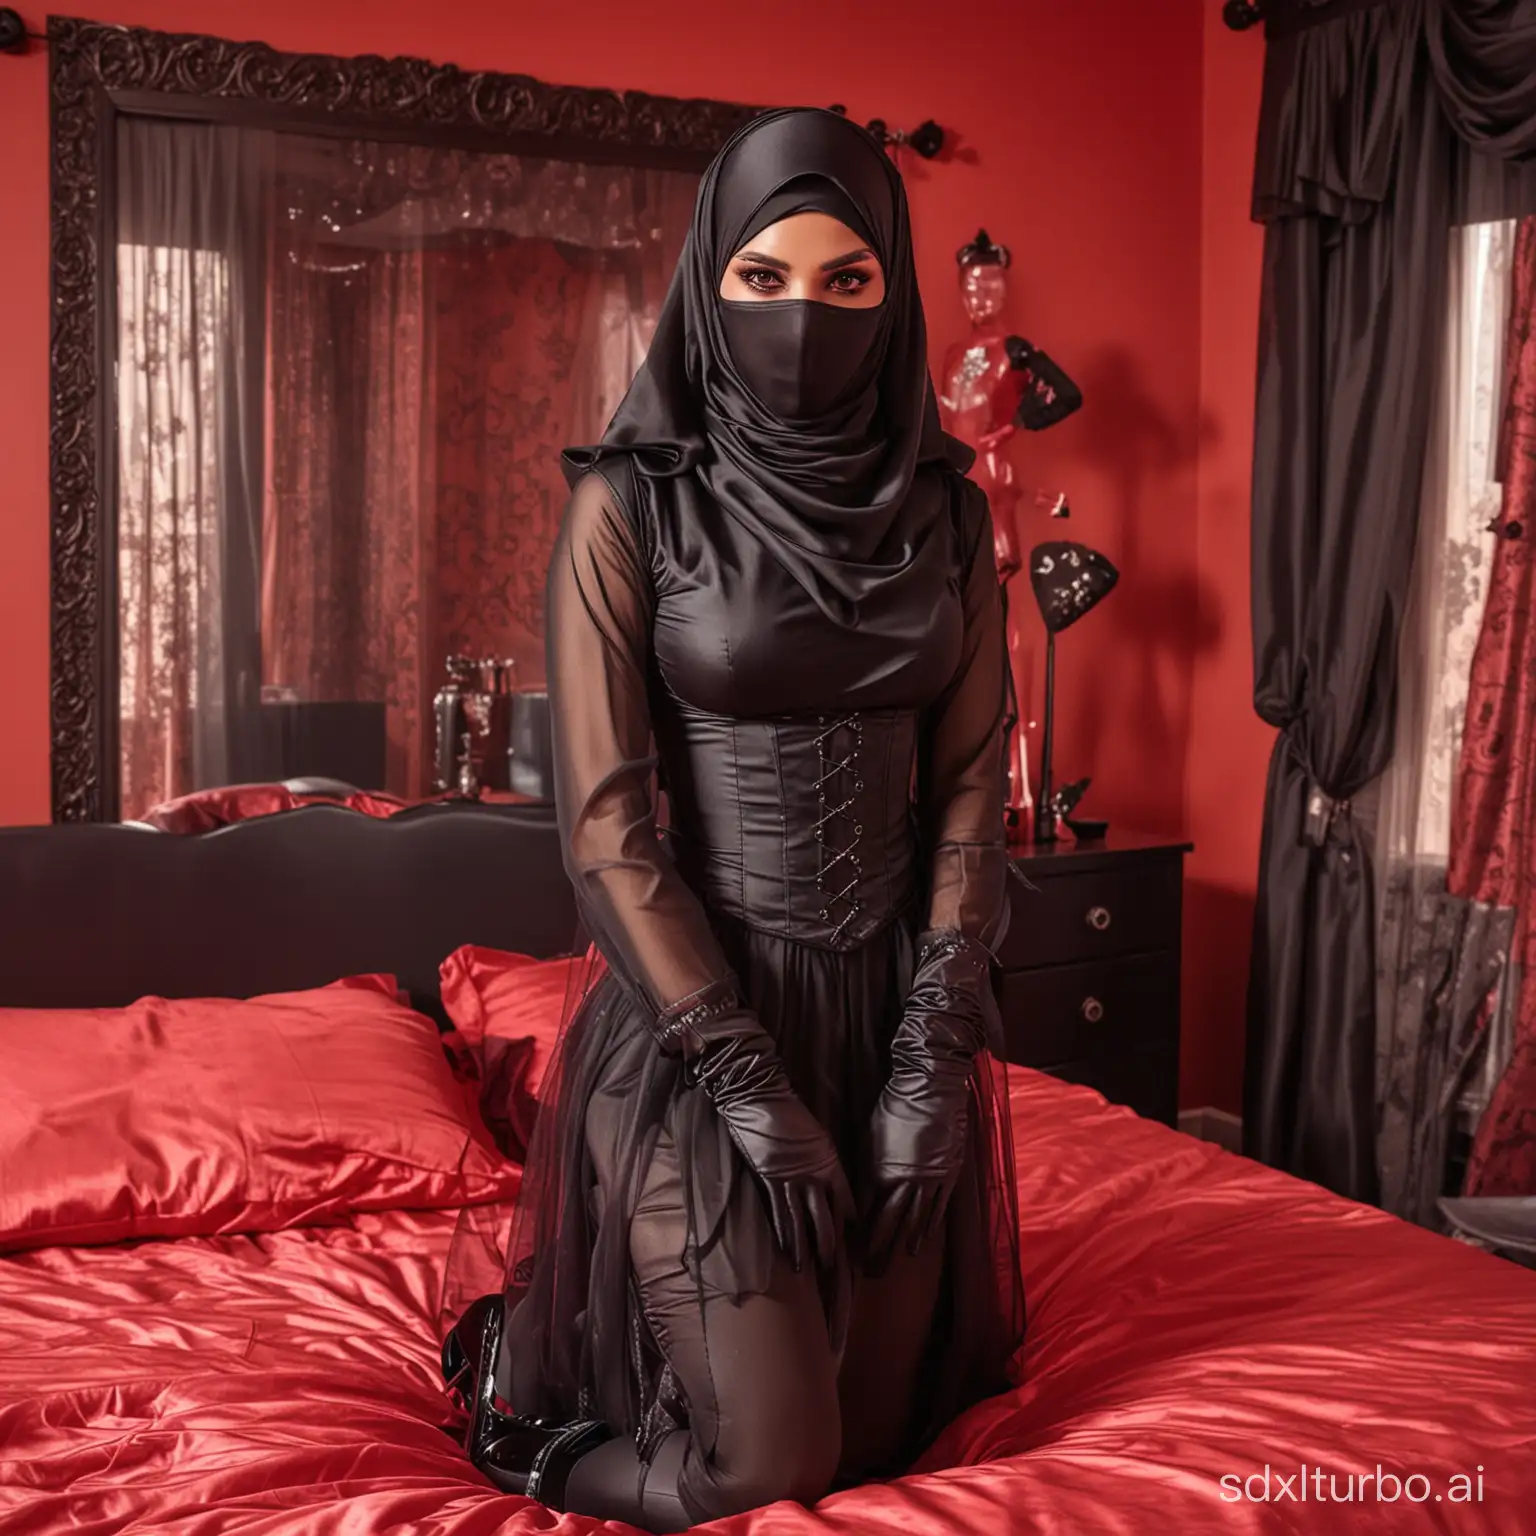 Elegant-Transformation-Man-in-Hijab-and-Mask-in-Red-Bedroom